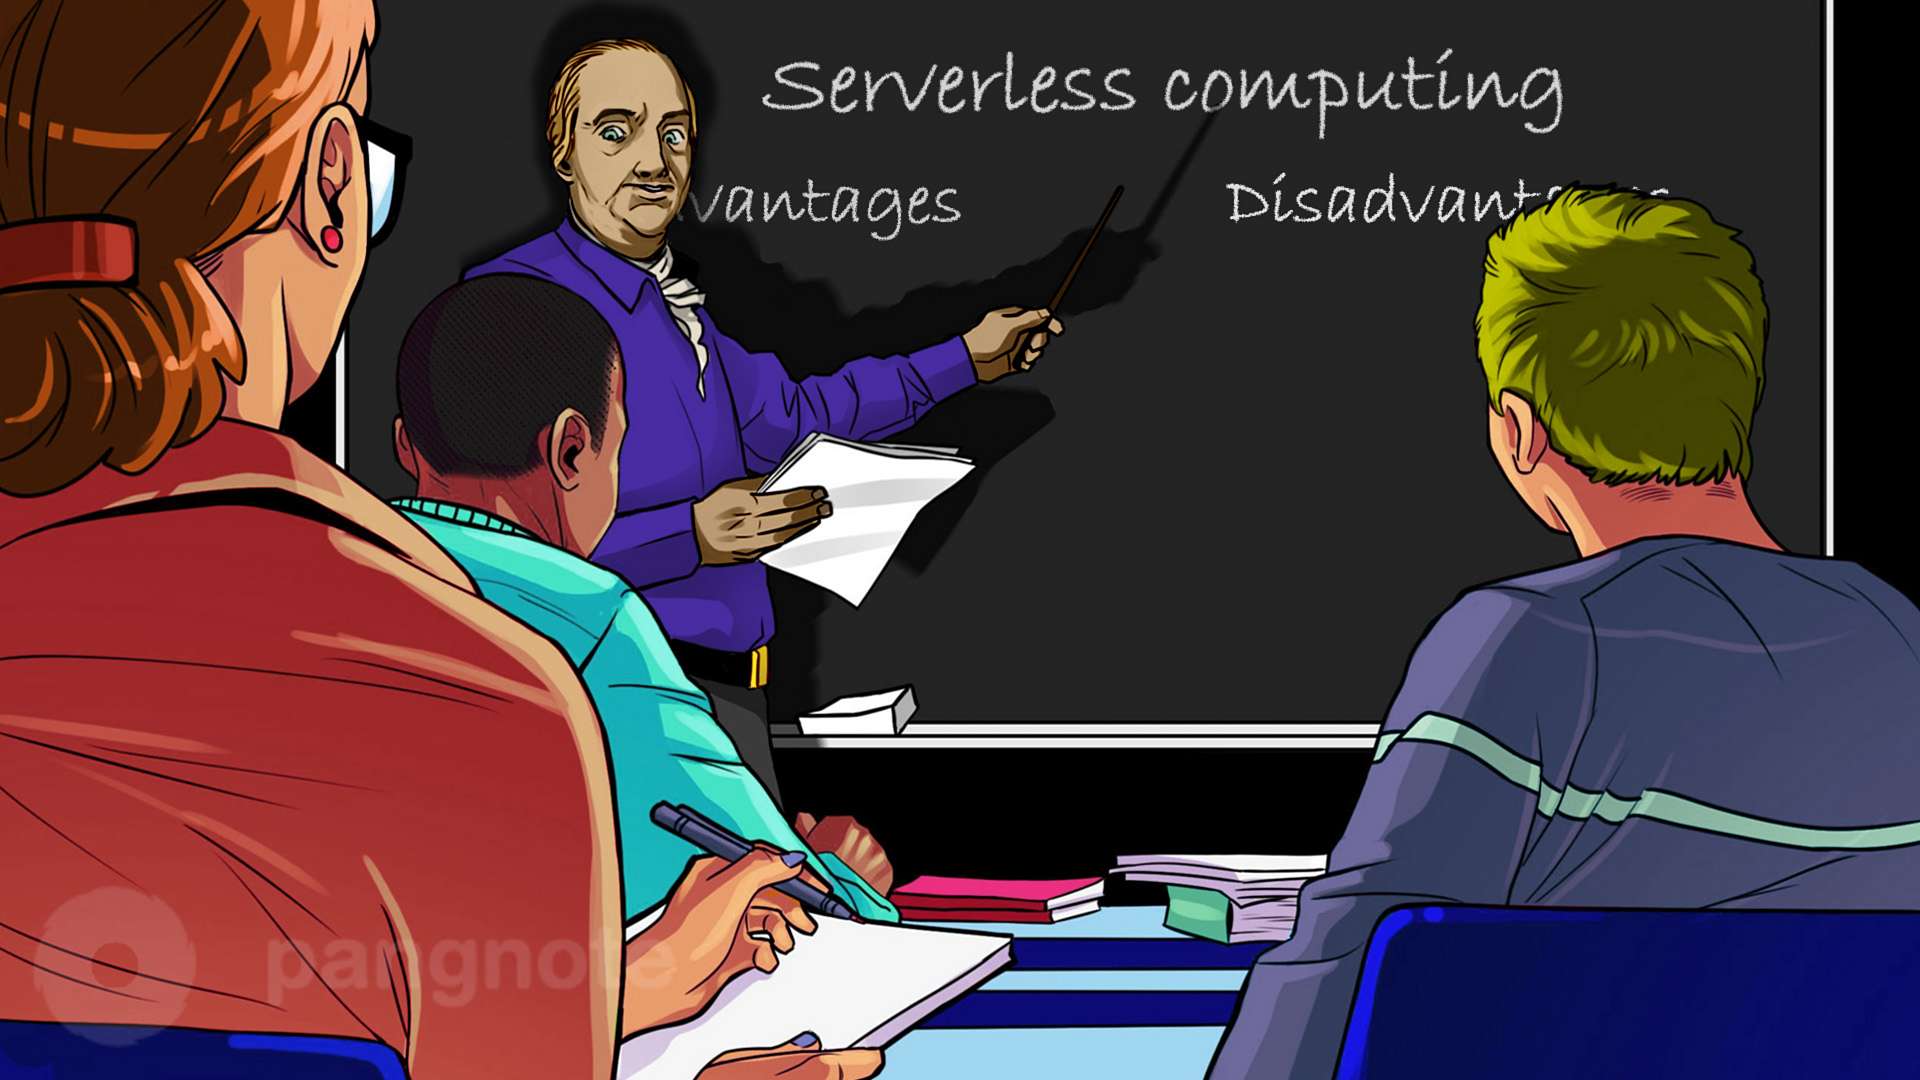 The advantages of serverless computing do not compensate for their disadvantages. Understanding why